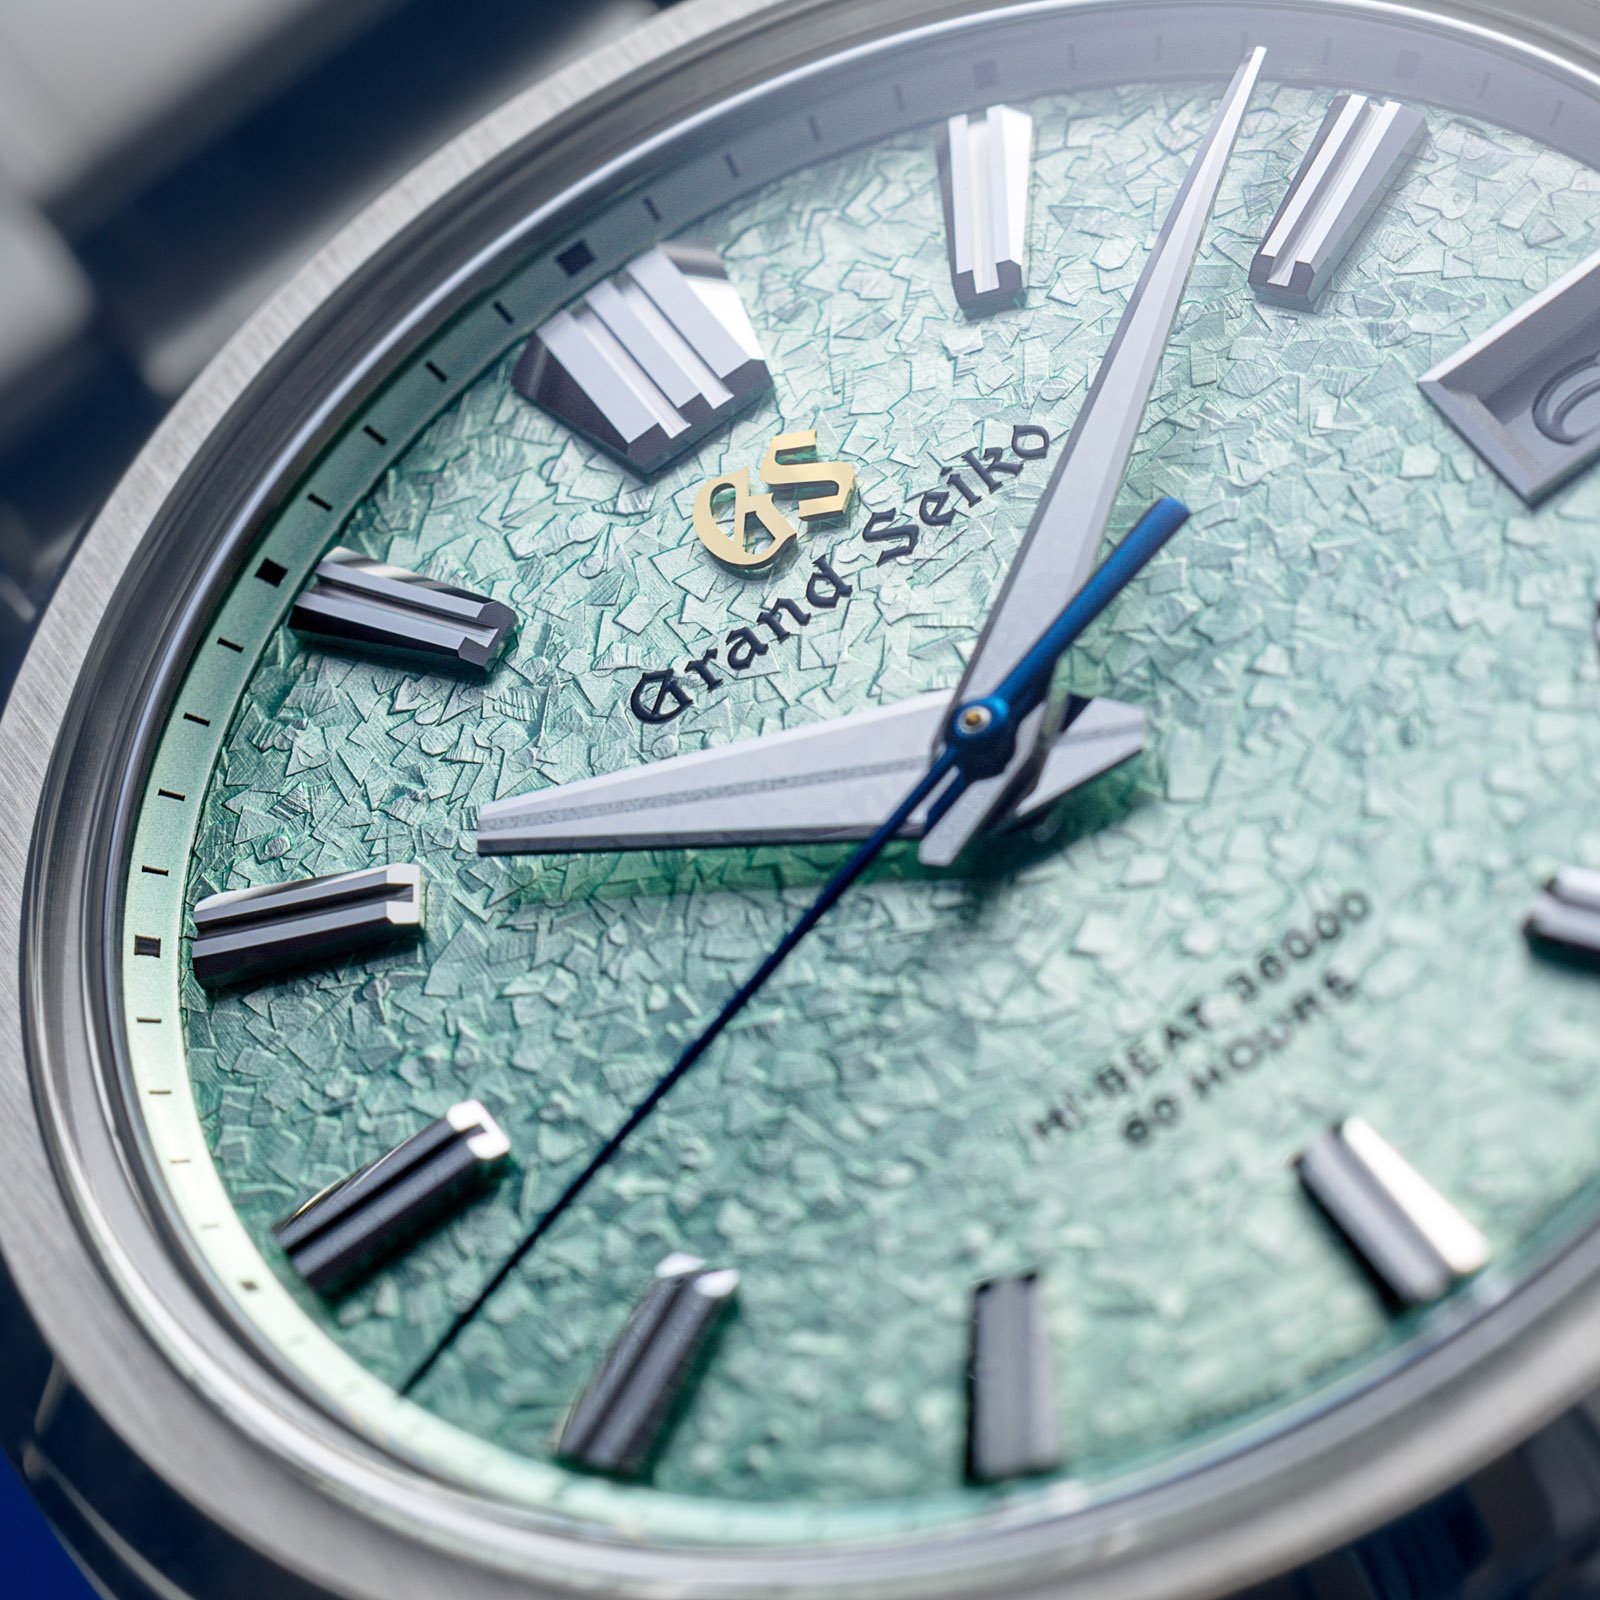 The dial of Grand Seiko Evolution 9 Hi-Beat watch inspired by Genbi Valley.